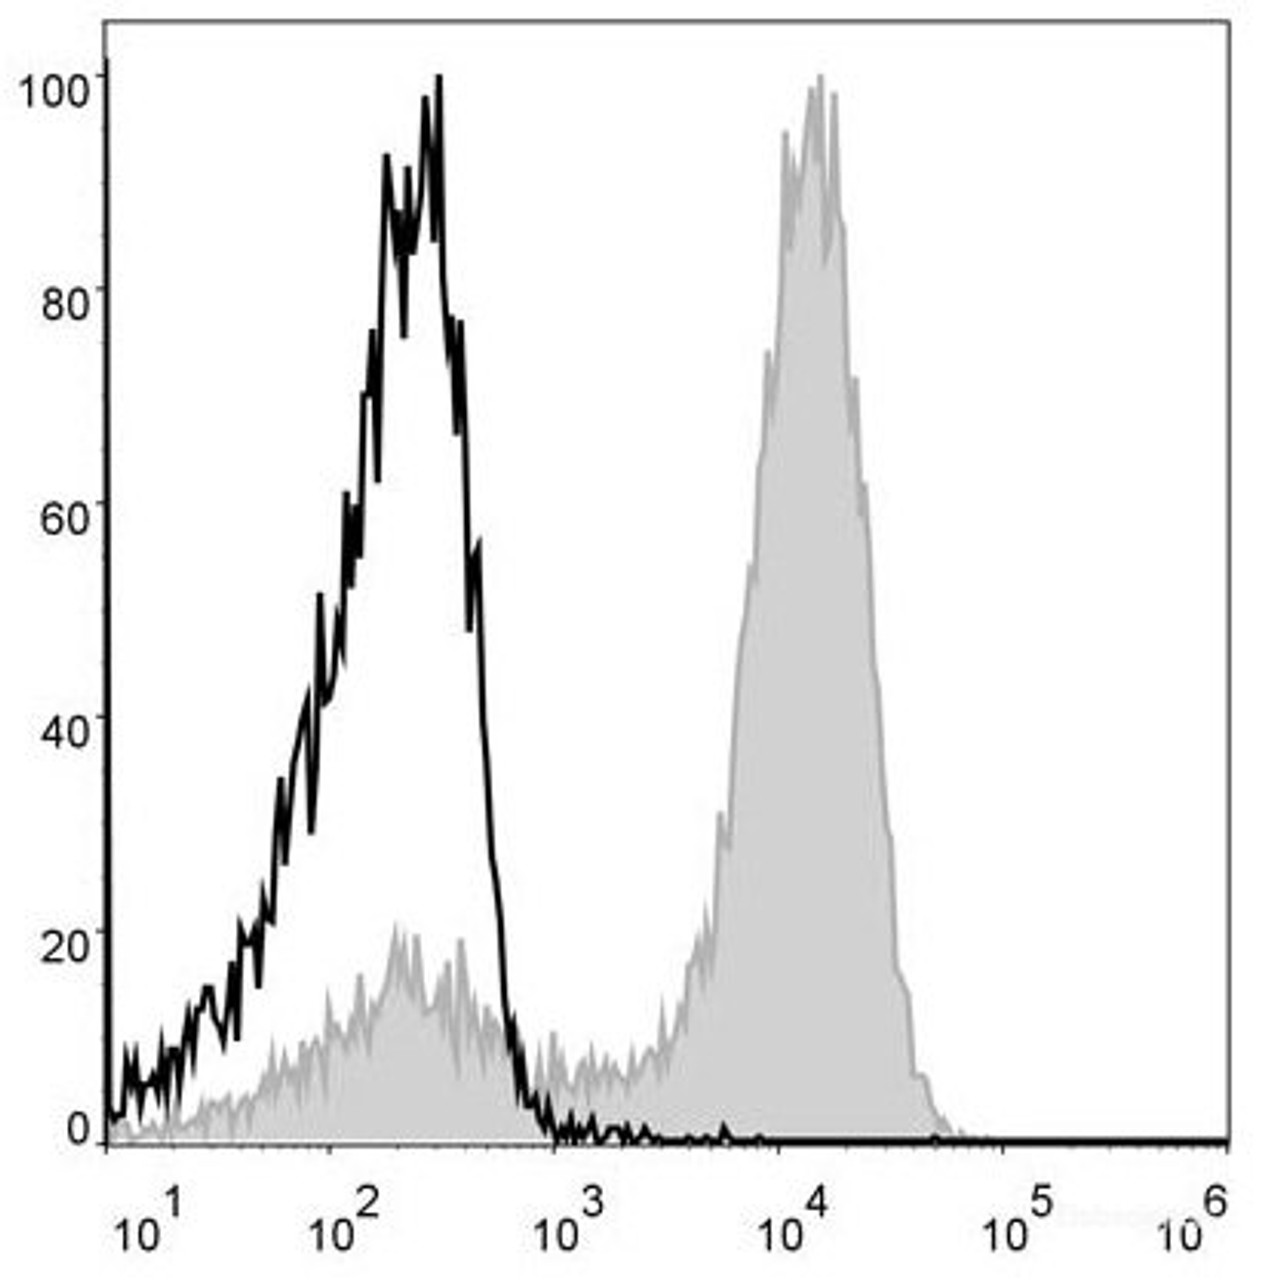 Mouse bone marrow cells are stained with APC Anti-Mouse/Human CD11b Antibody[Used at .4 μg/1<sup>6</sup> cells dilution](filled gray histogram). Unstained bone marrow cells (blank black histogram) are used as control.